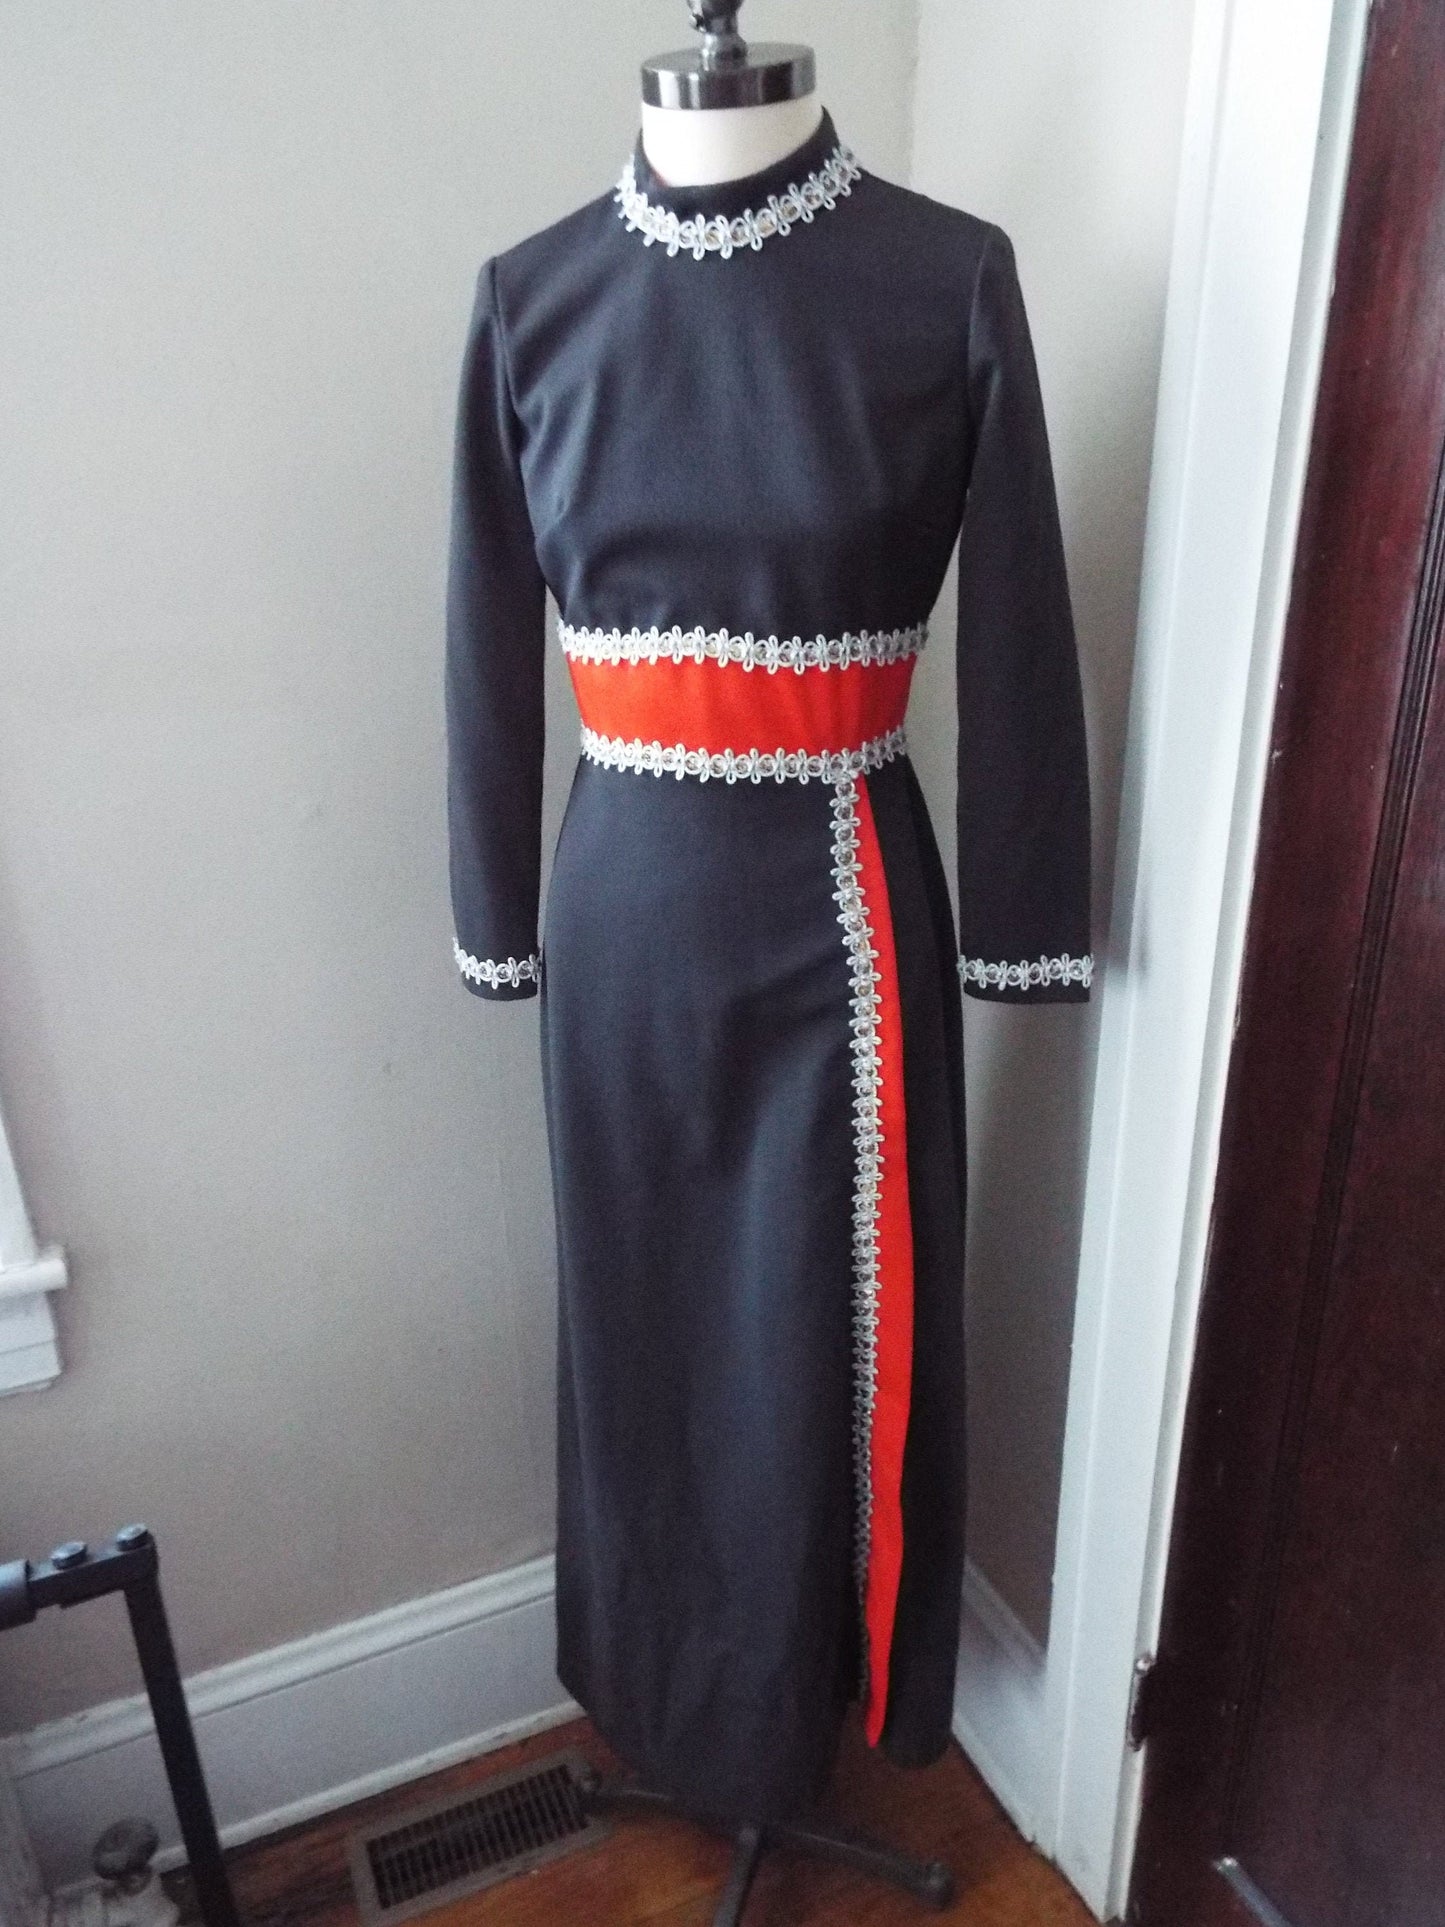 Vintage Long Sleeve Dress by Jerry Lurie